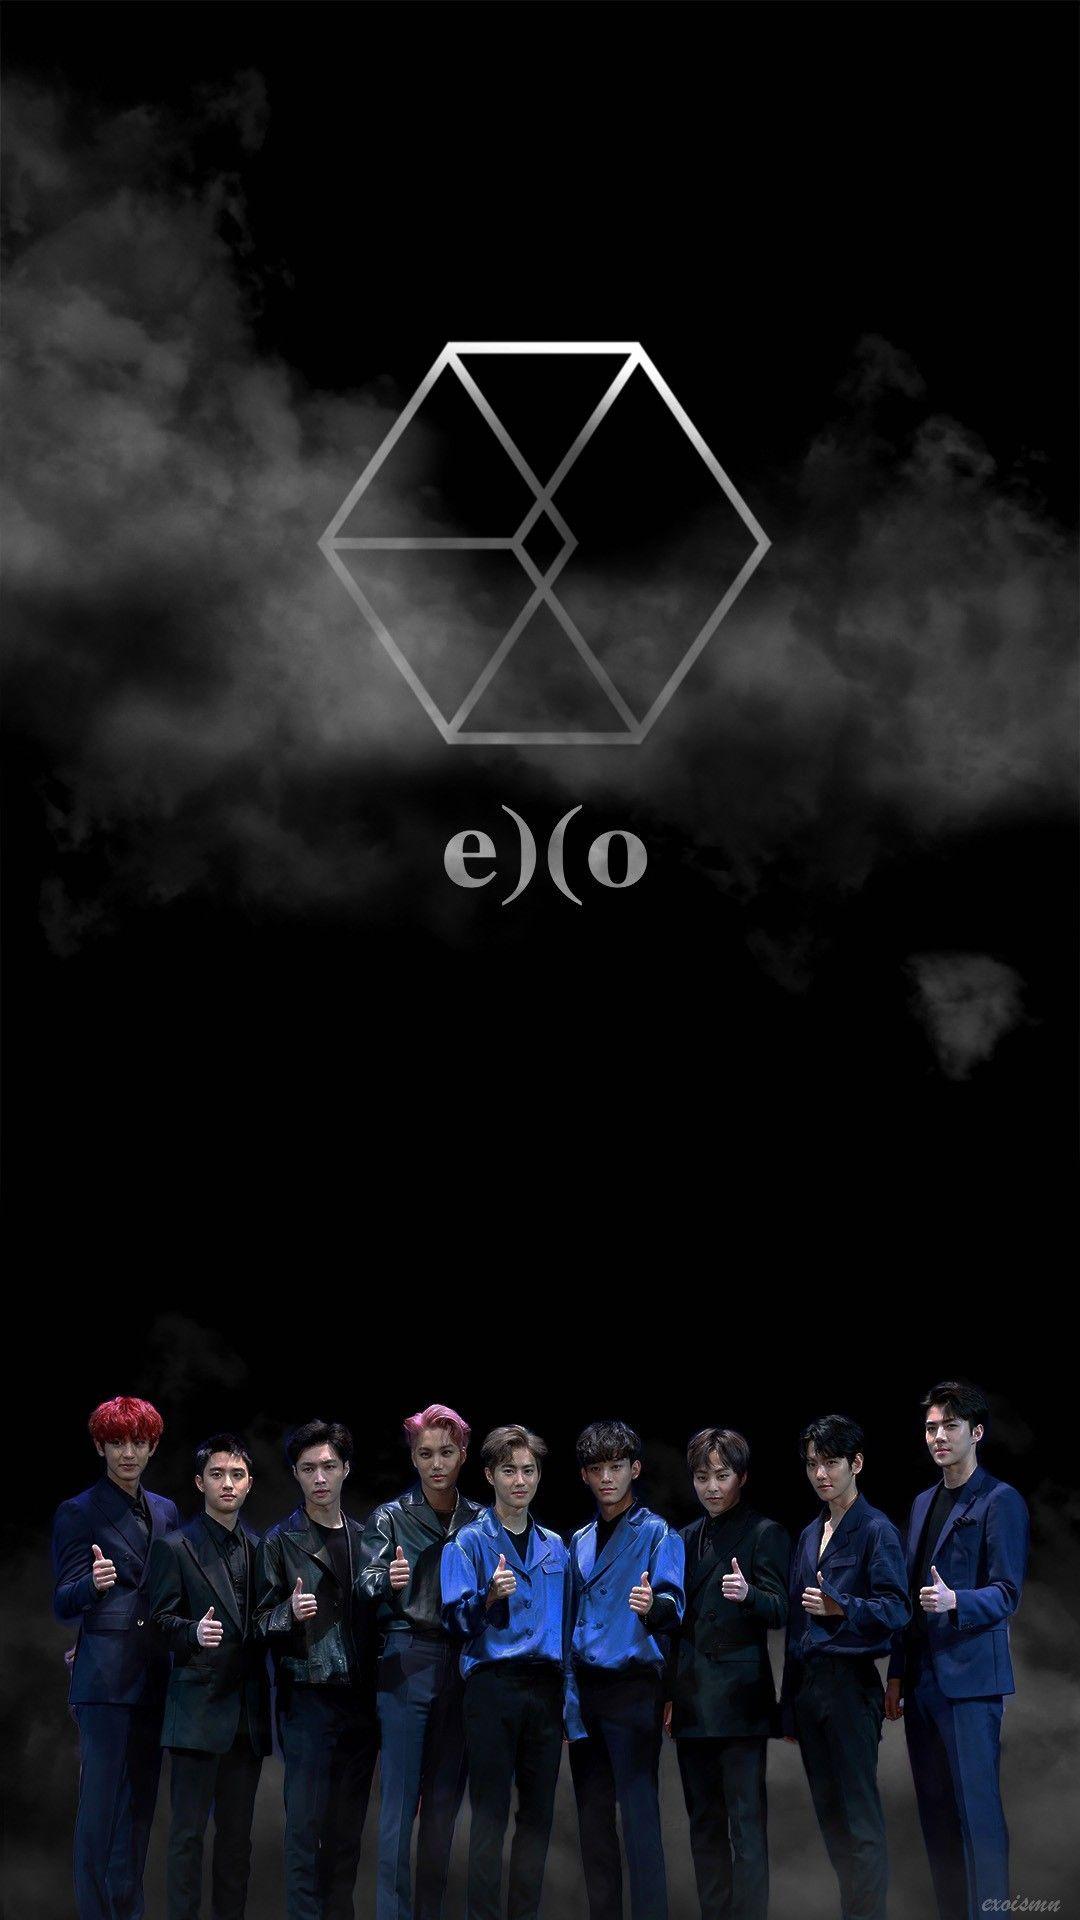 Res: 1080x Exo Wallpaper HD iPhone Lovely Exo HD